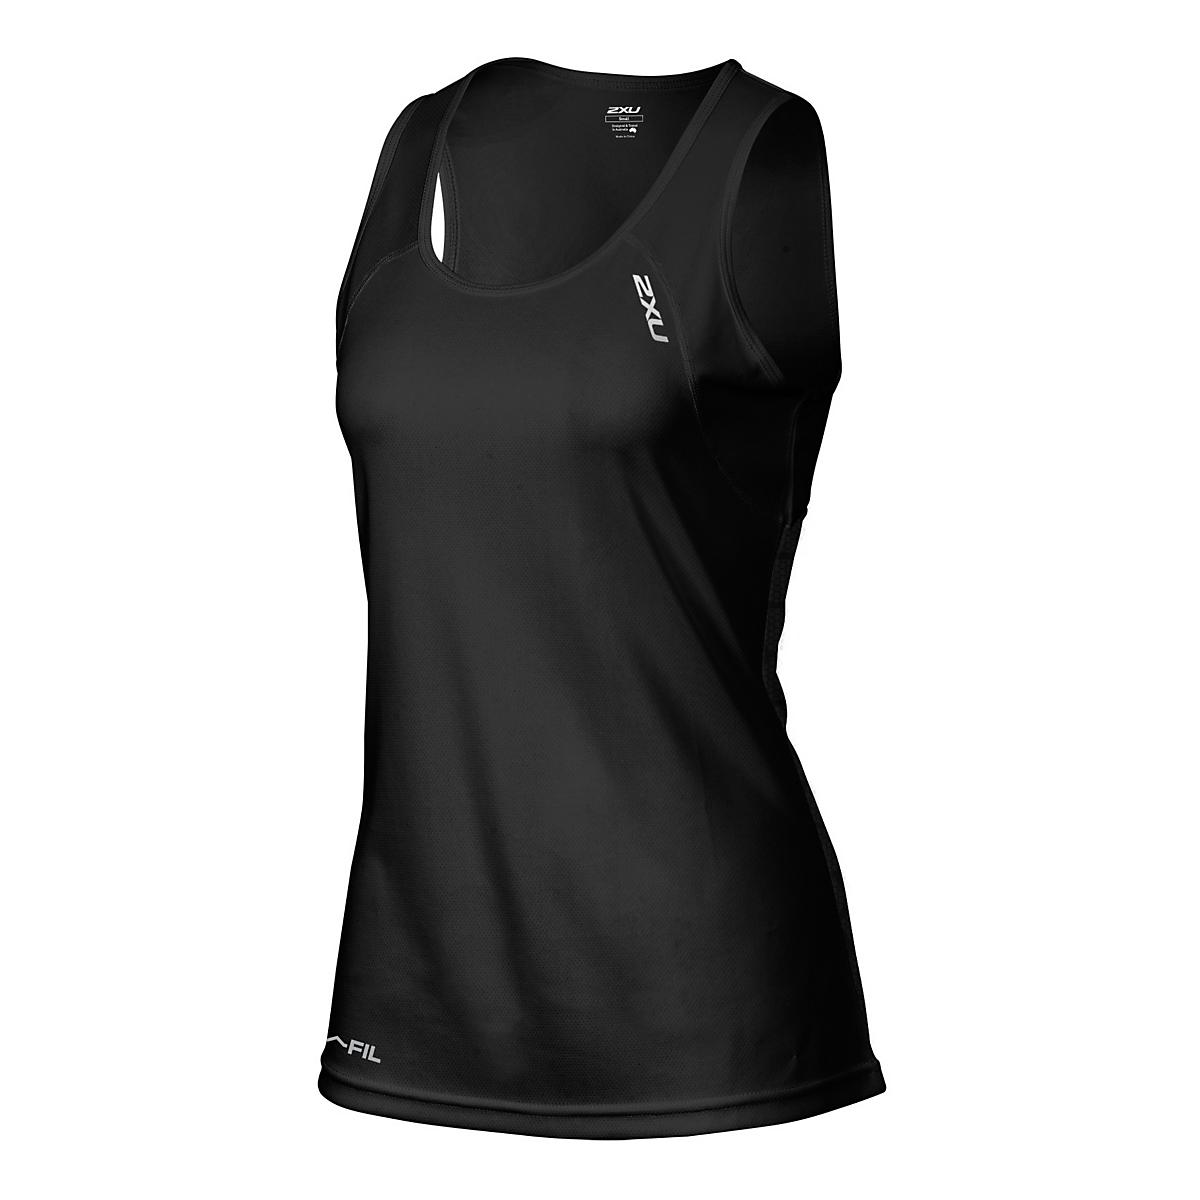 Womens Nike Pro Cool Sleeveless & Tank Technical Tops at Road Runner Sports